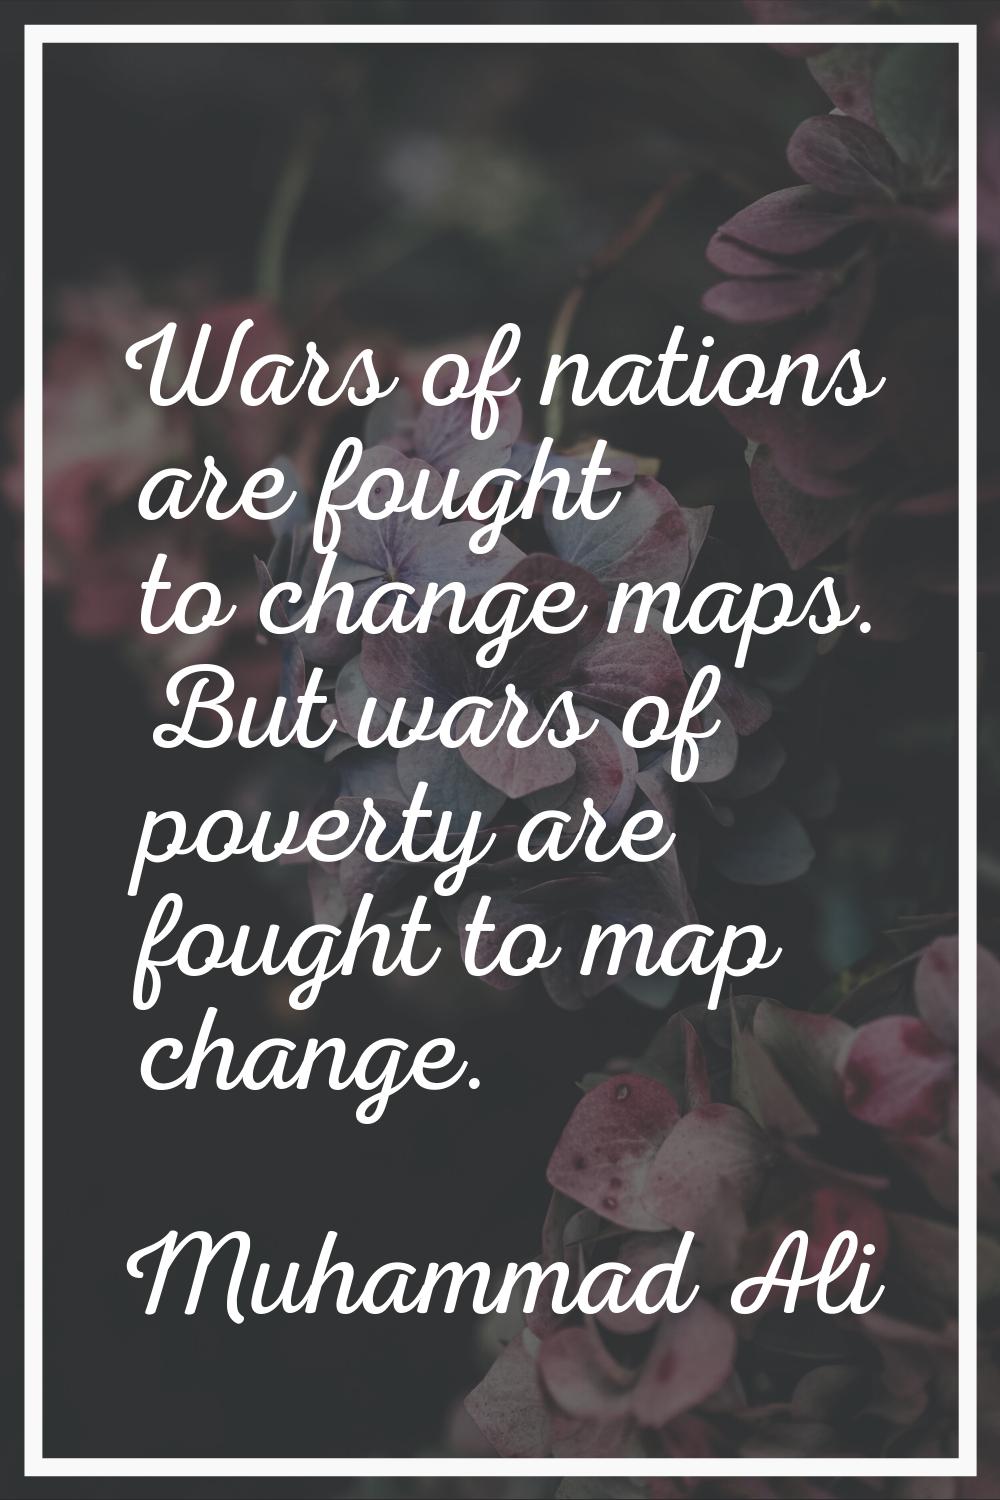 Wars of nations are fought to change maps. But wars of poverty are fought to map change.